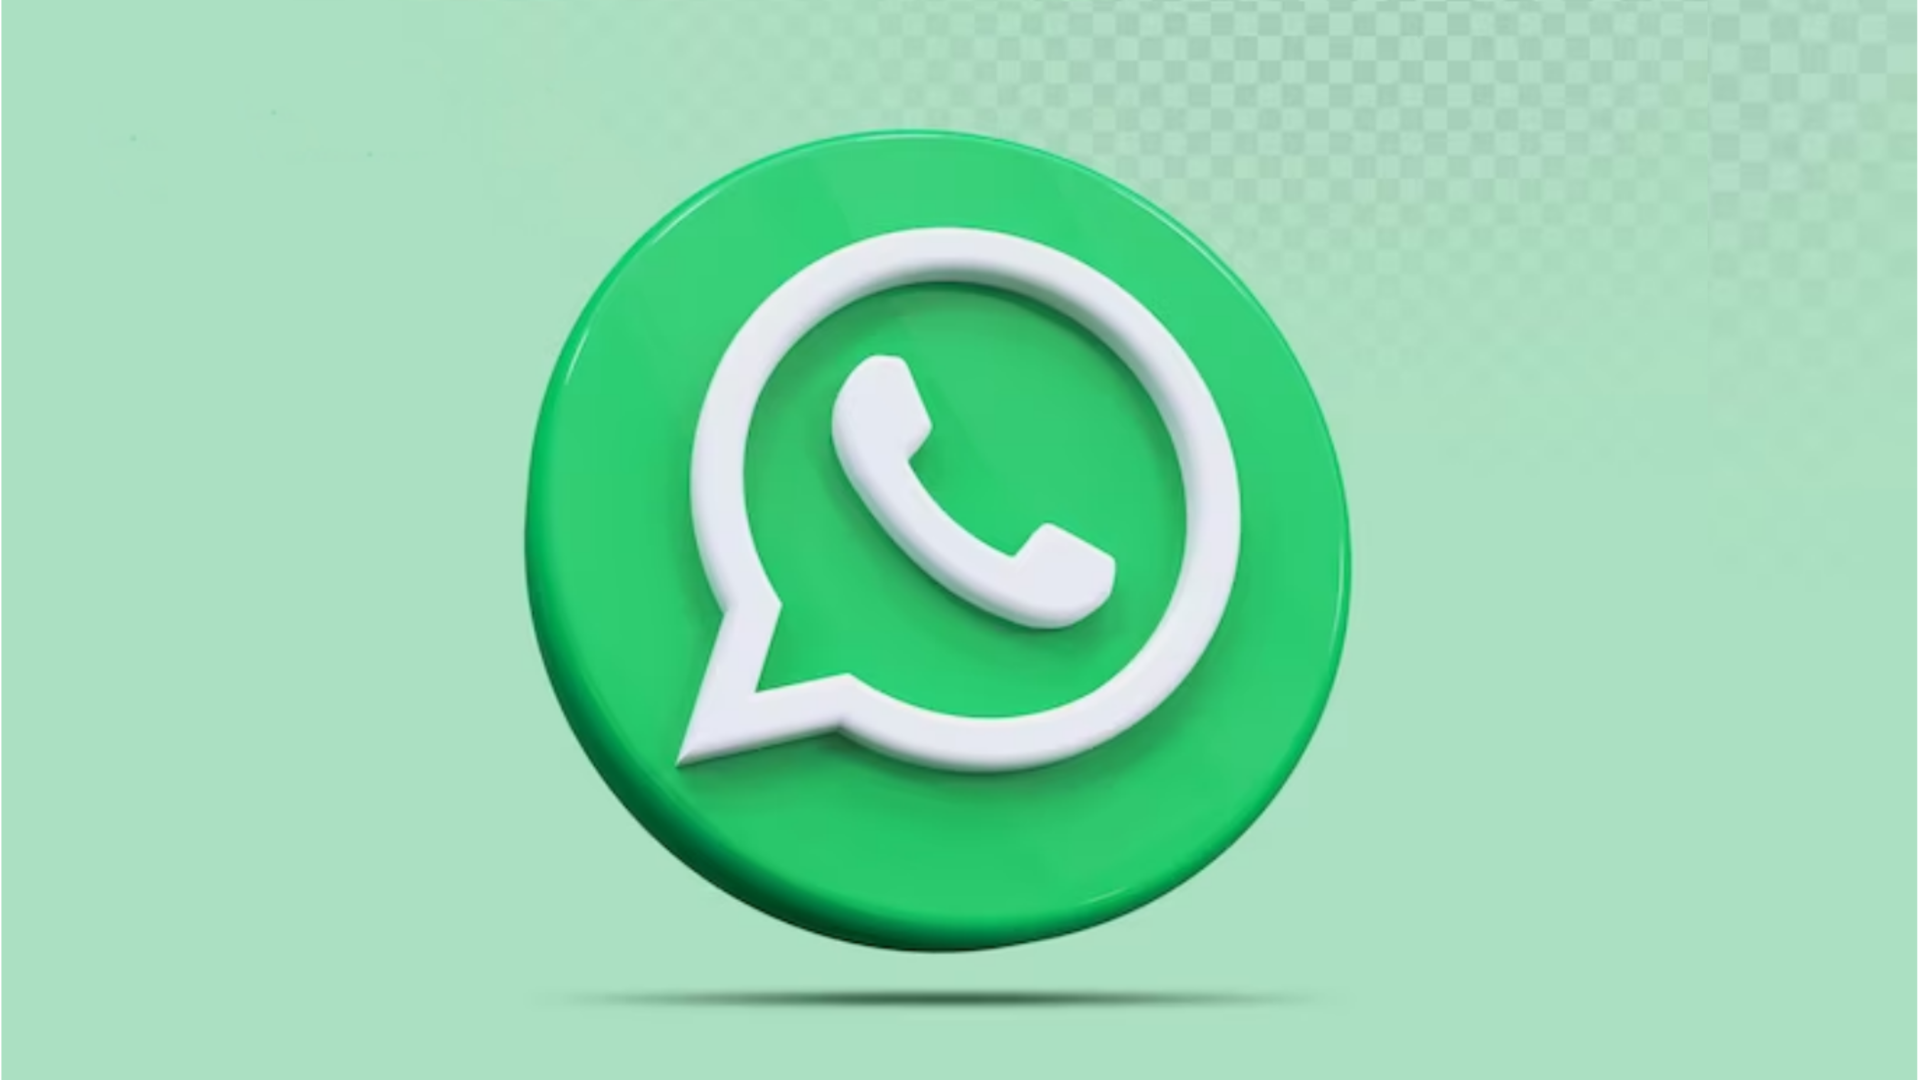 New WhatsApp update introduces ability to silence unknown callers